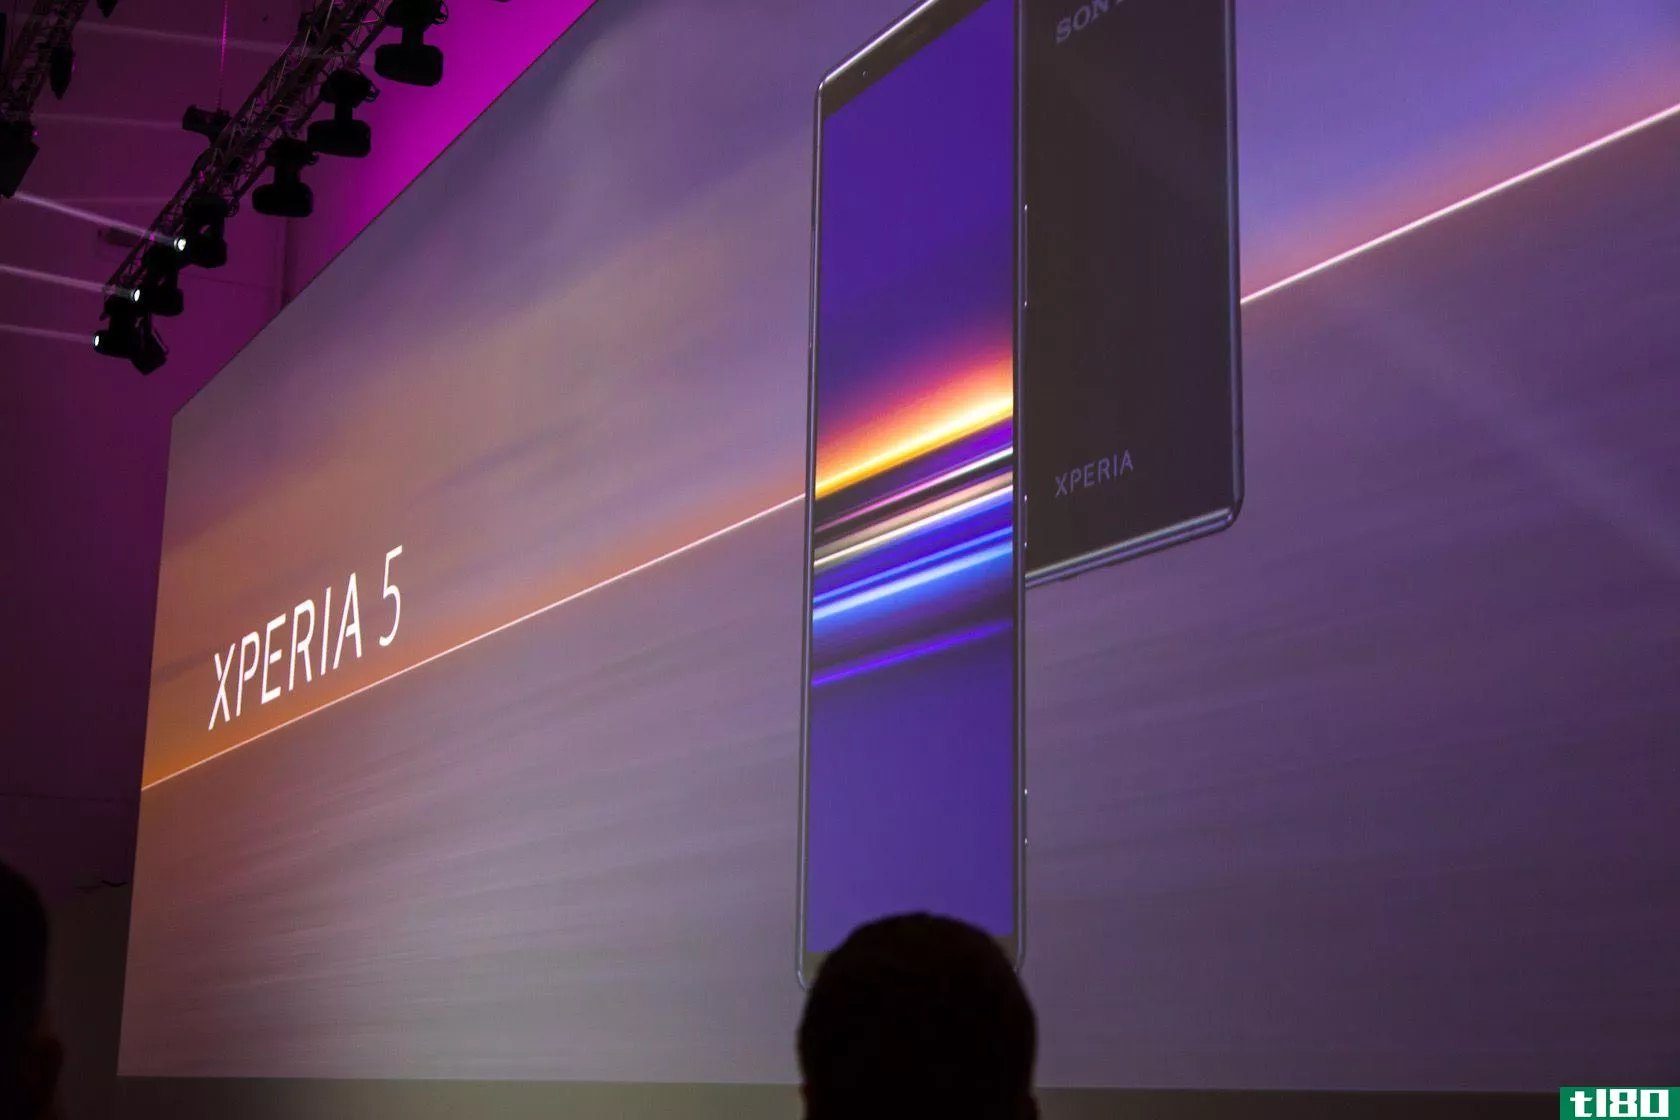 Sony Xperia 5 launch event